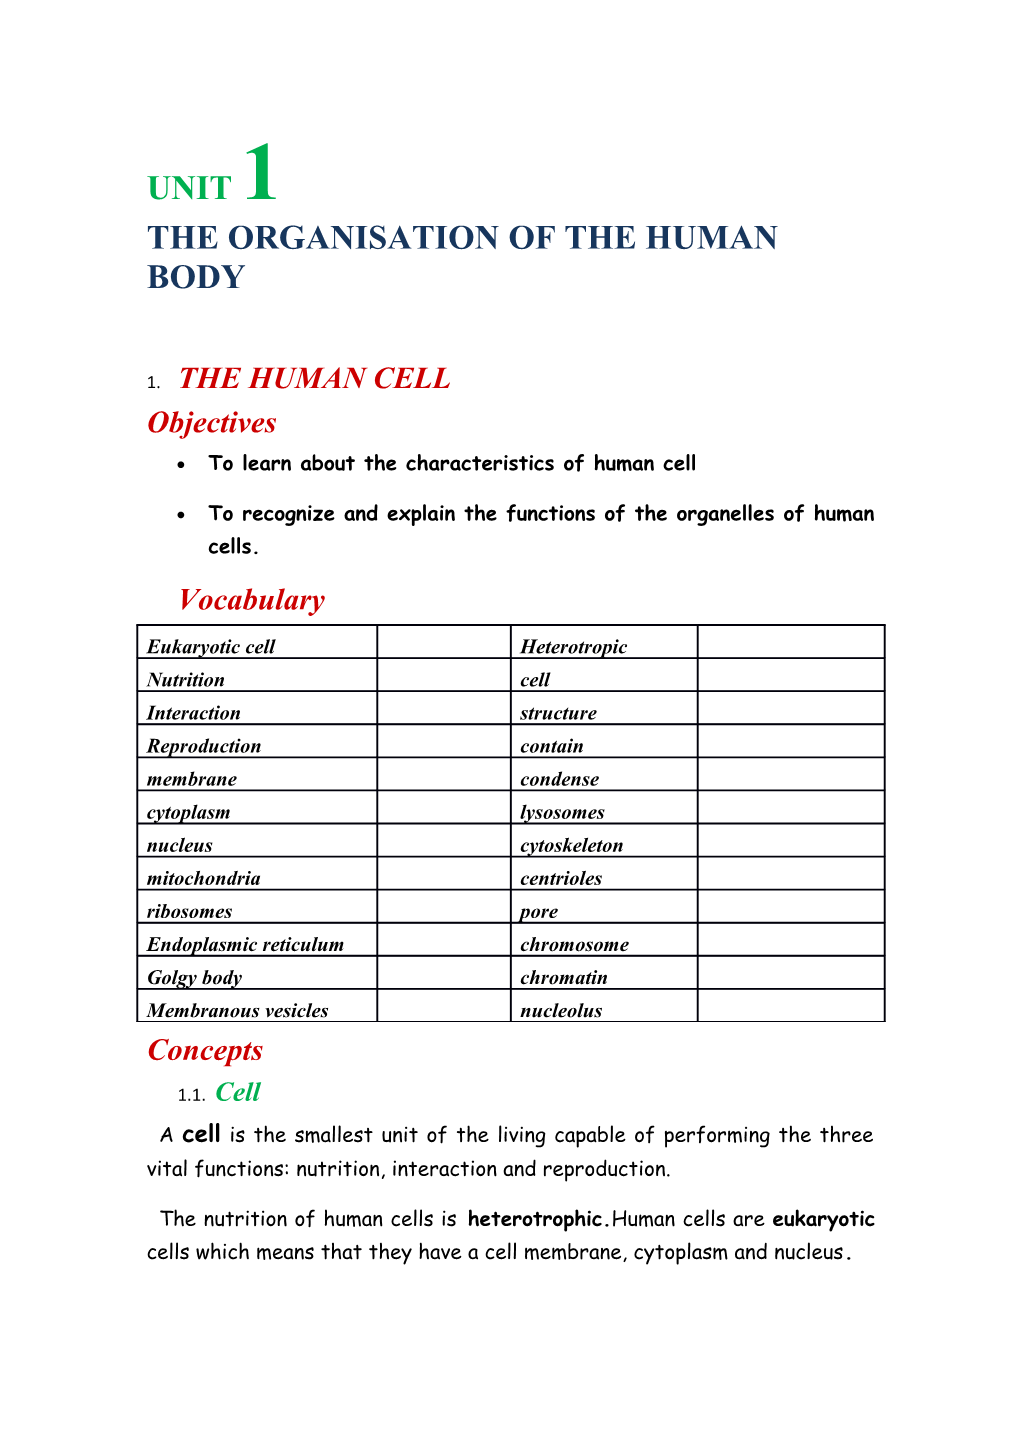 The Organisation of the Human Body